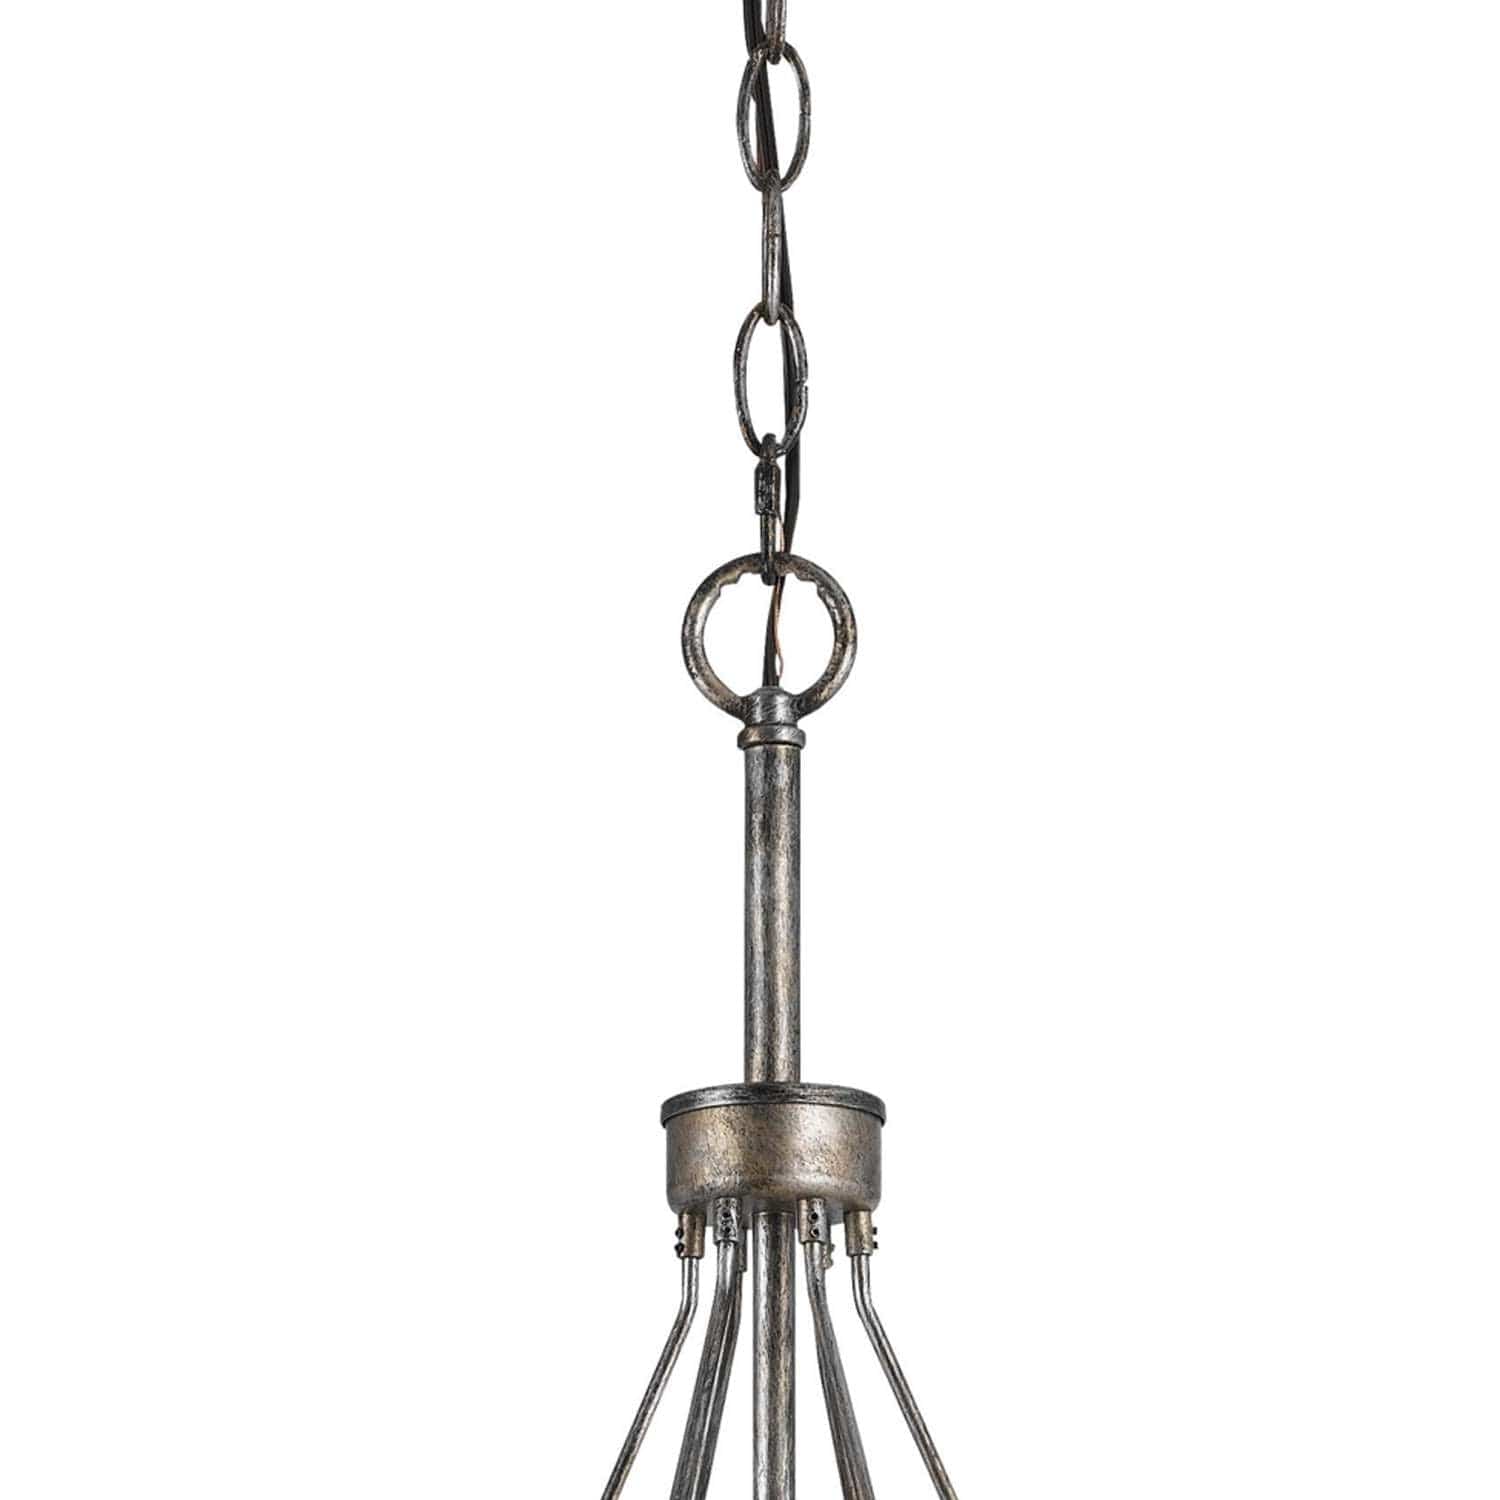 Benzara 3 Bulb Pendent With Round Burlap Shade And Metal Frame, Beige By Benzara Chandeliers BM223631